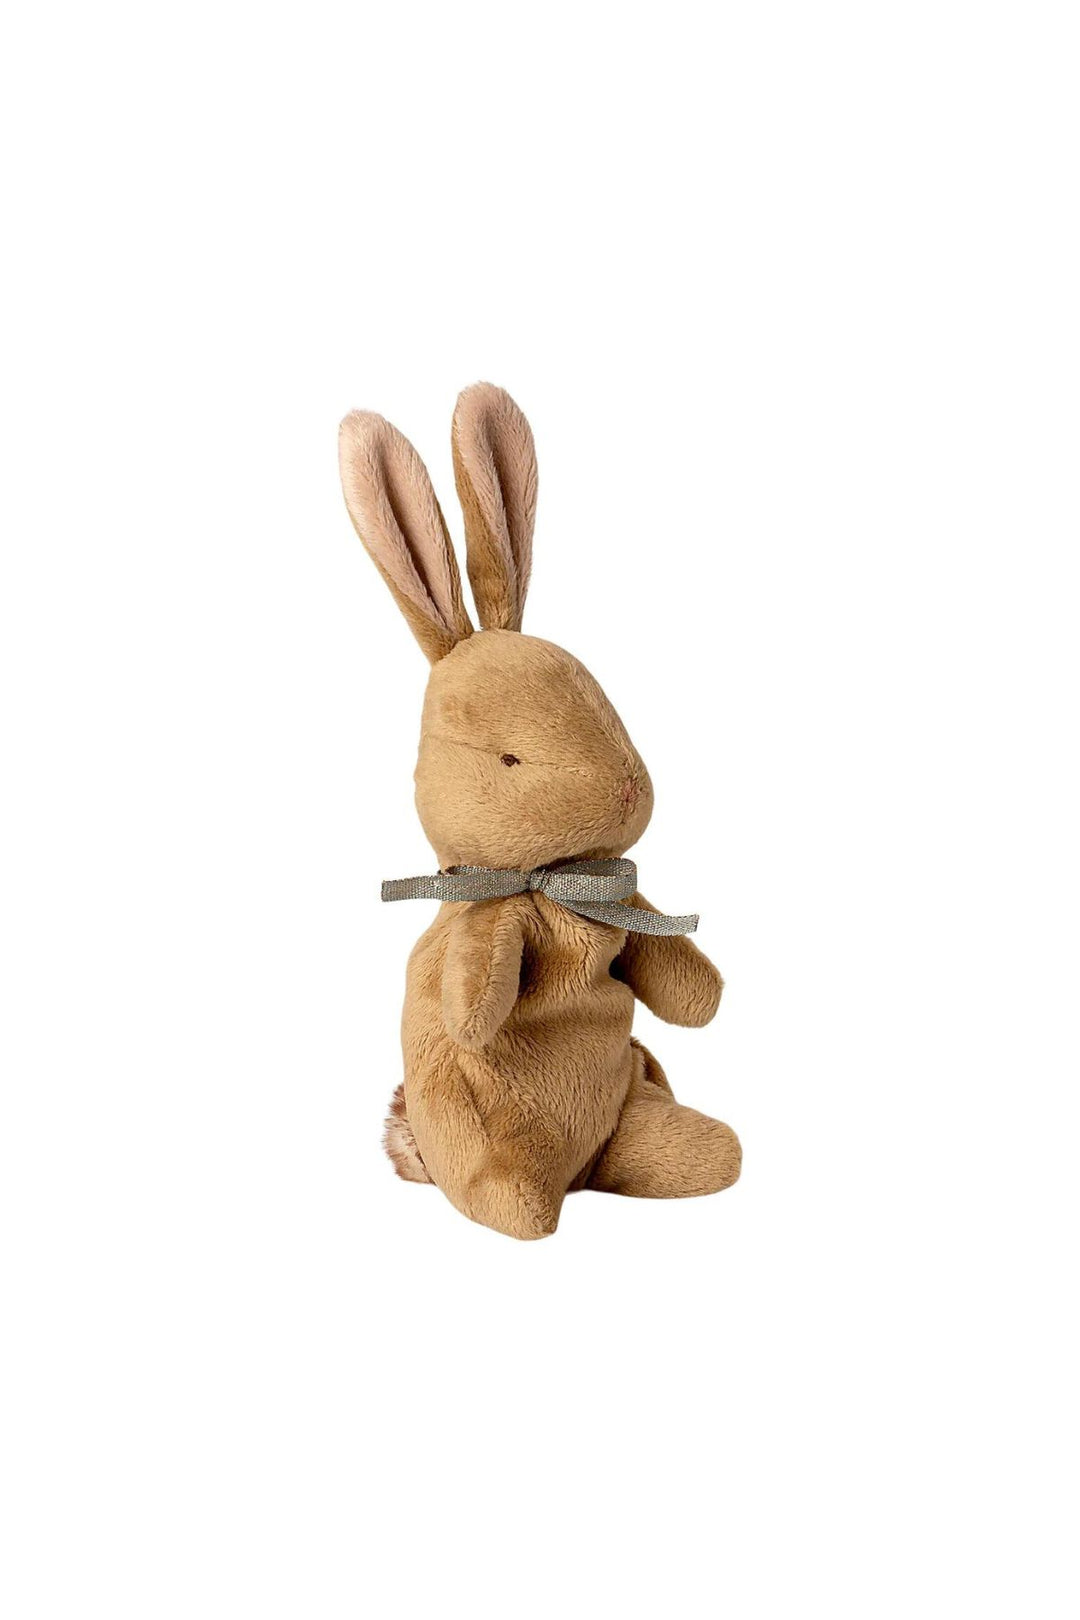 My First Bunny in Light Blue: Adorable Companion for Little Ones